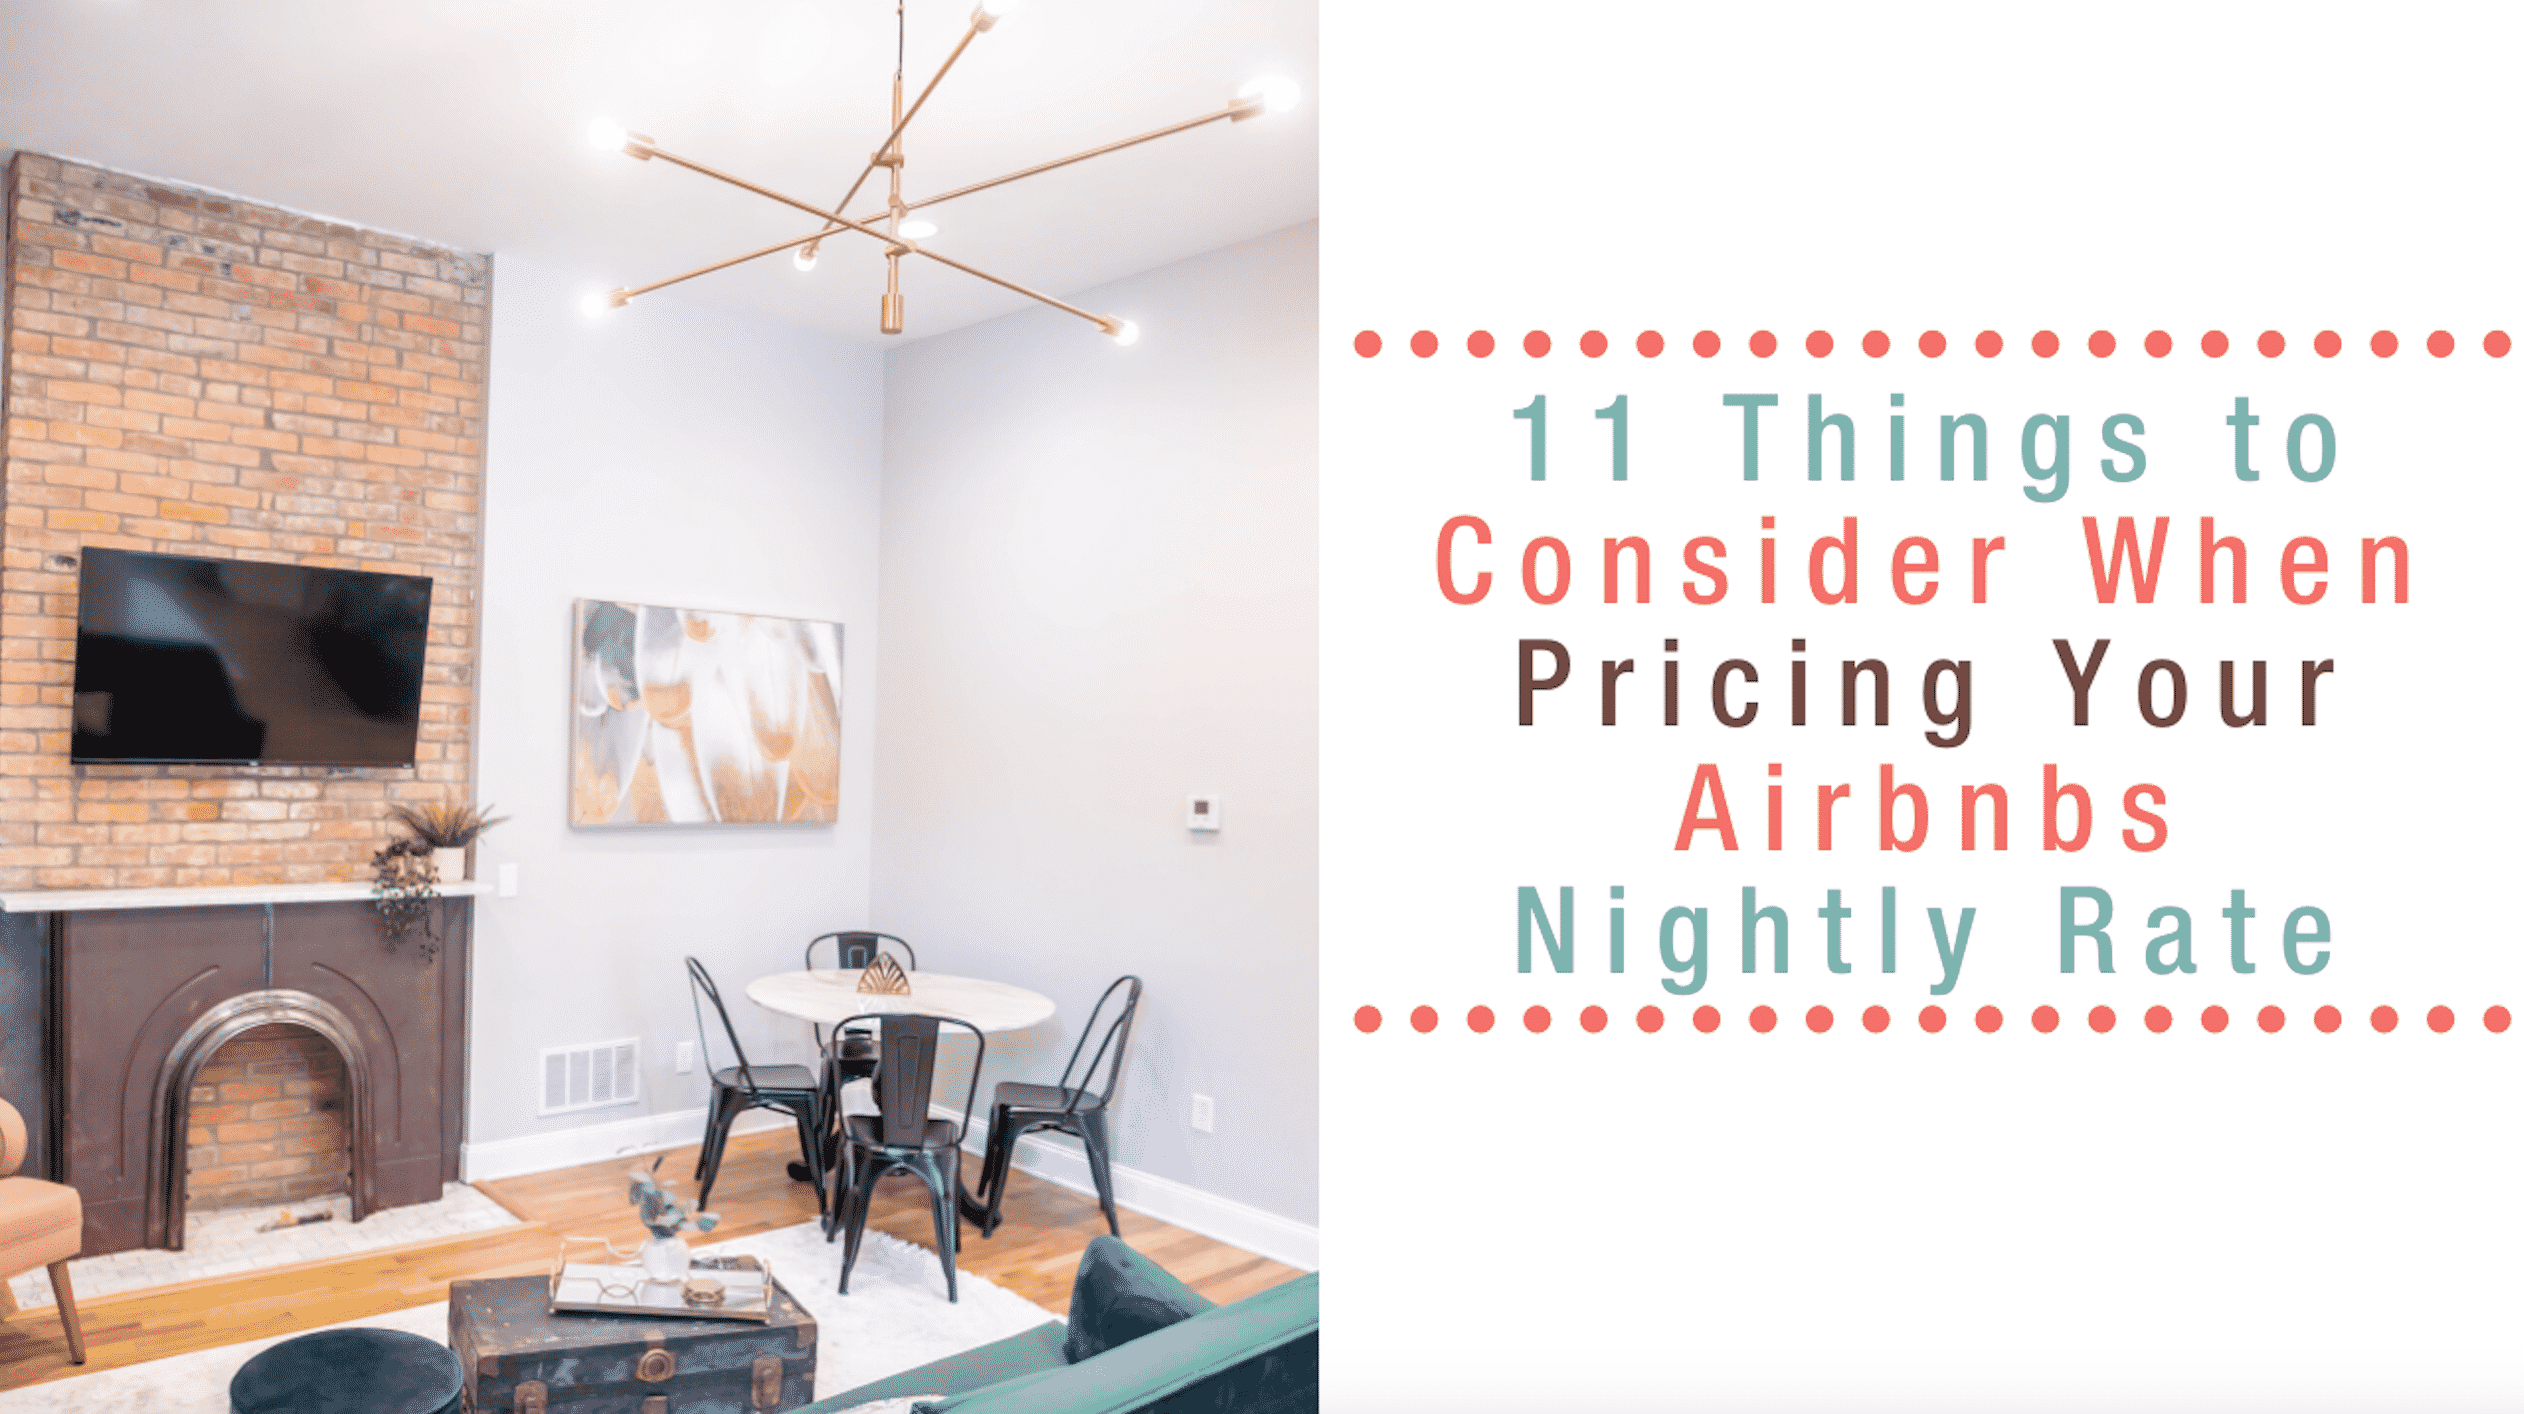 11_Things_to_Consider_When_Pricing_Your_Airbnbs_Nightly_Rate